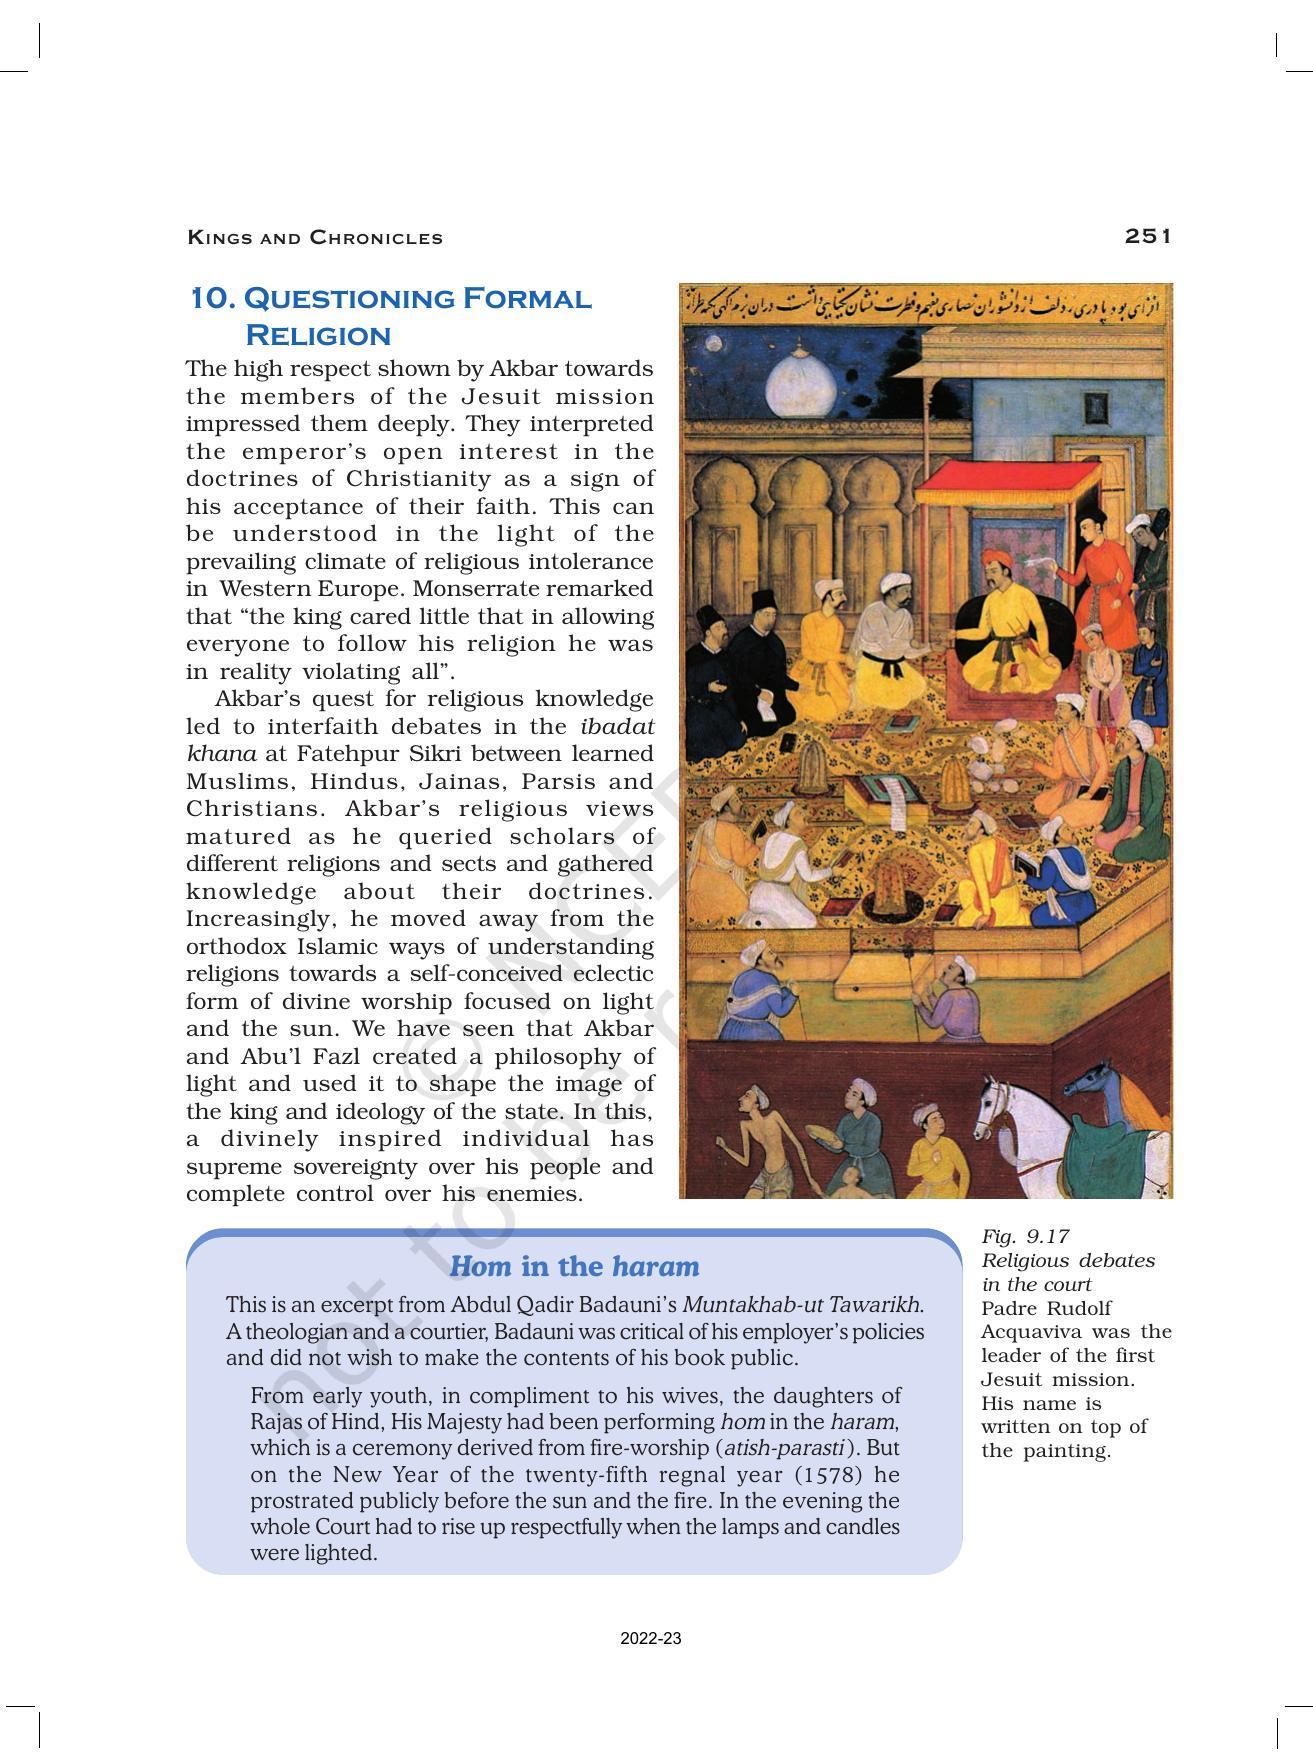 NCERT Book for Class 12 History (Part-II) Chapter 9 Kings and Chronicles - Page 28